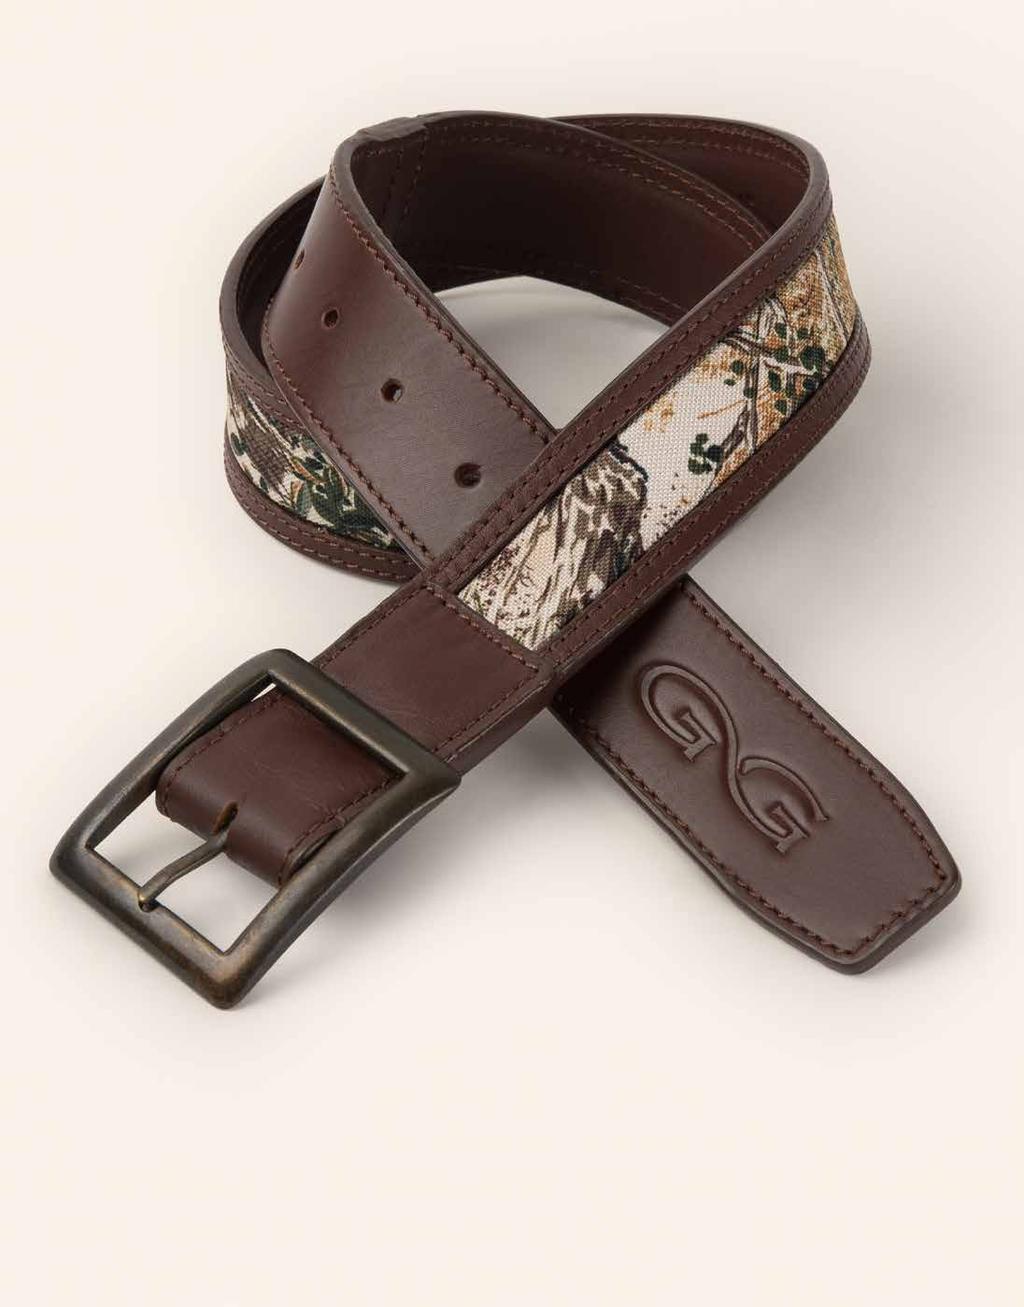 SIGNATURE BELT SIGNATURE YOUTH BELT SIGNATURE DOG LEASH SIGNATURE DOG COLLAR Featuring wear-resistant 600D Canvas and